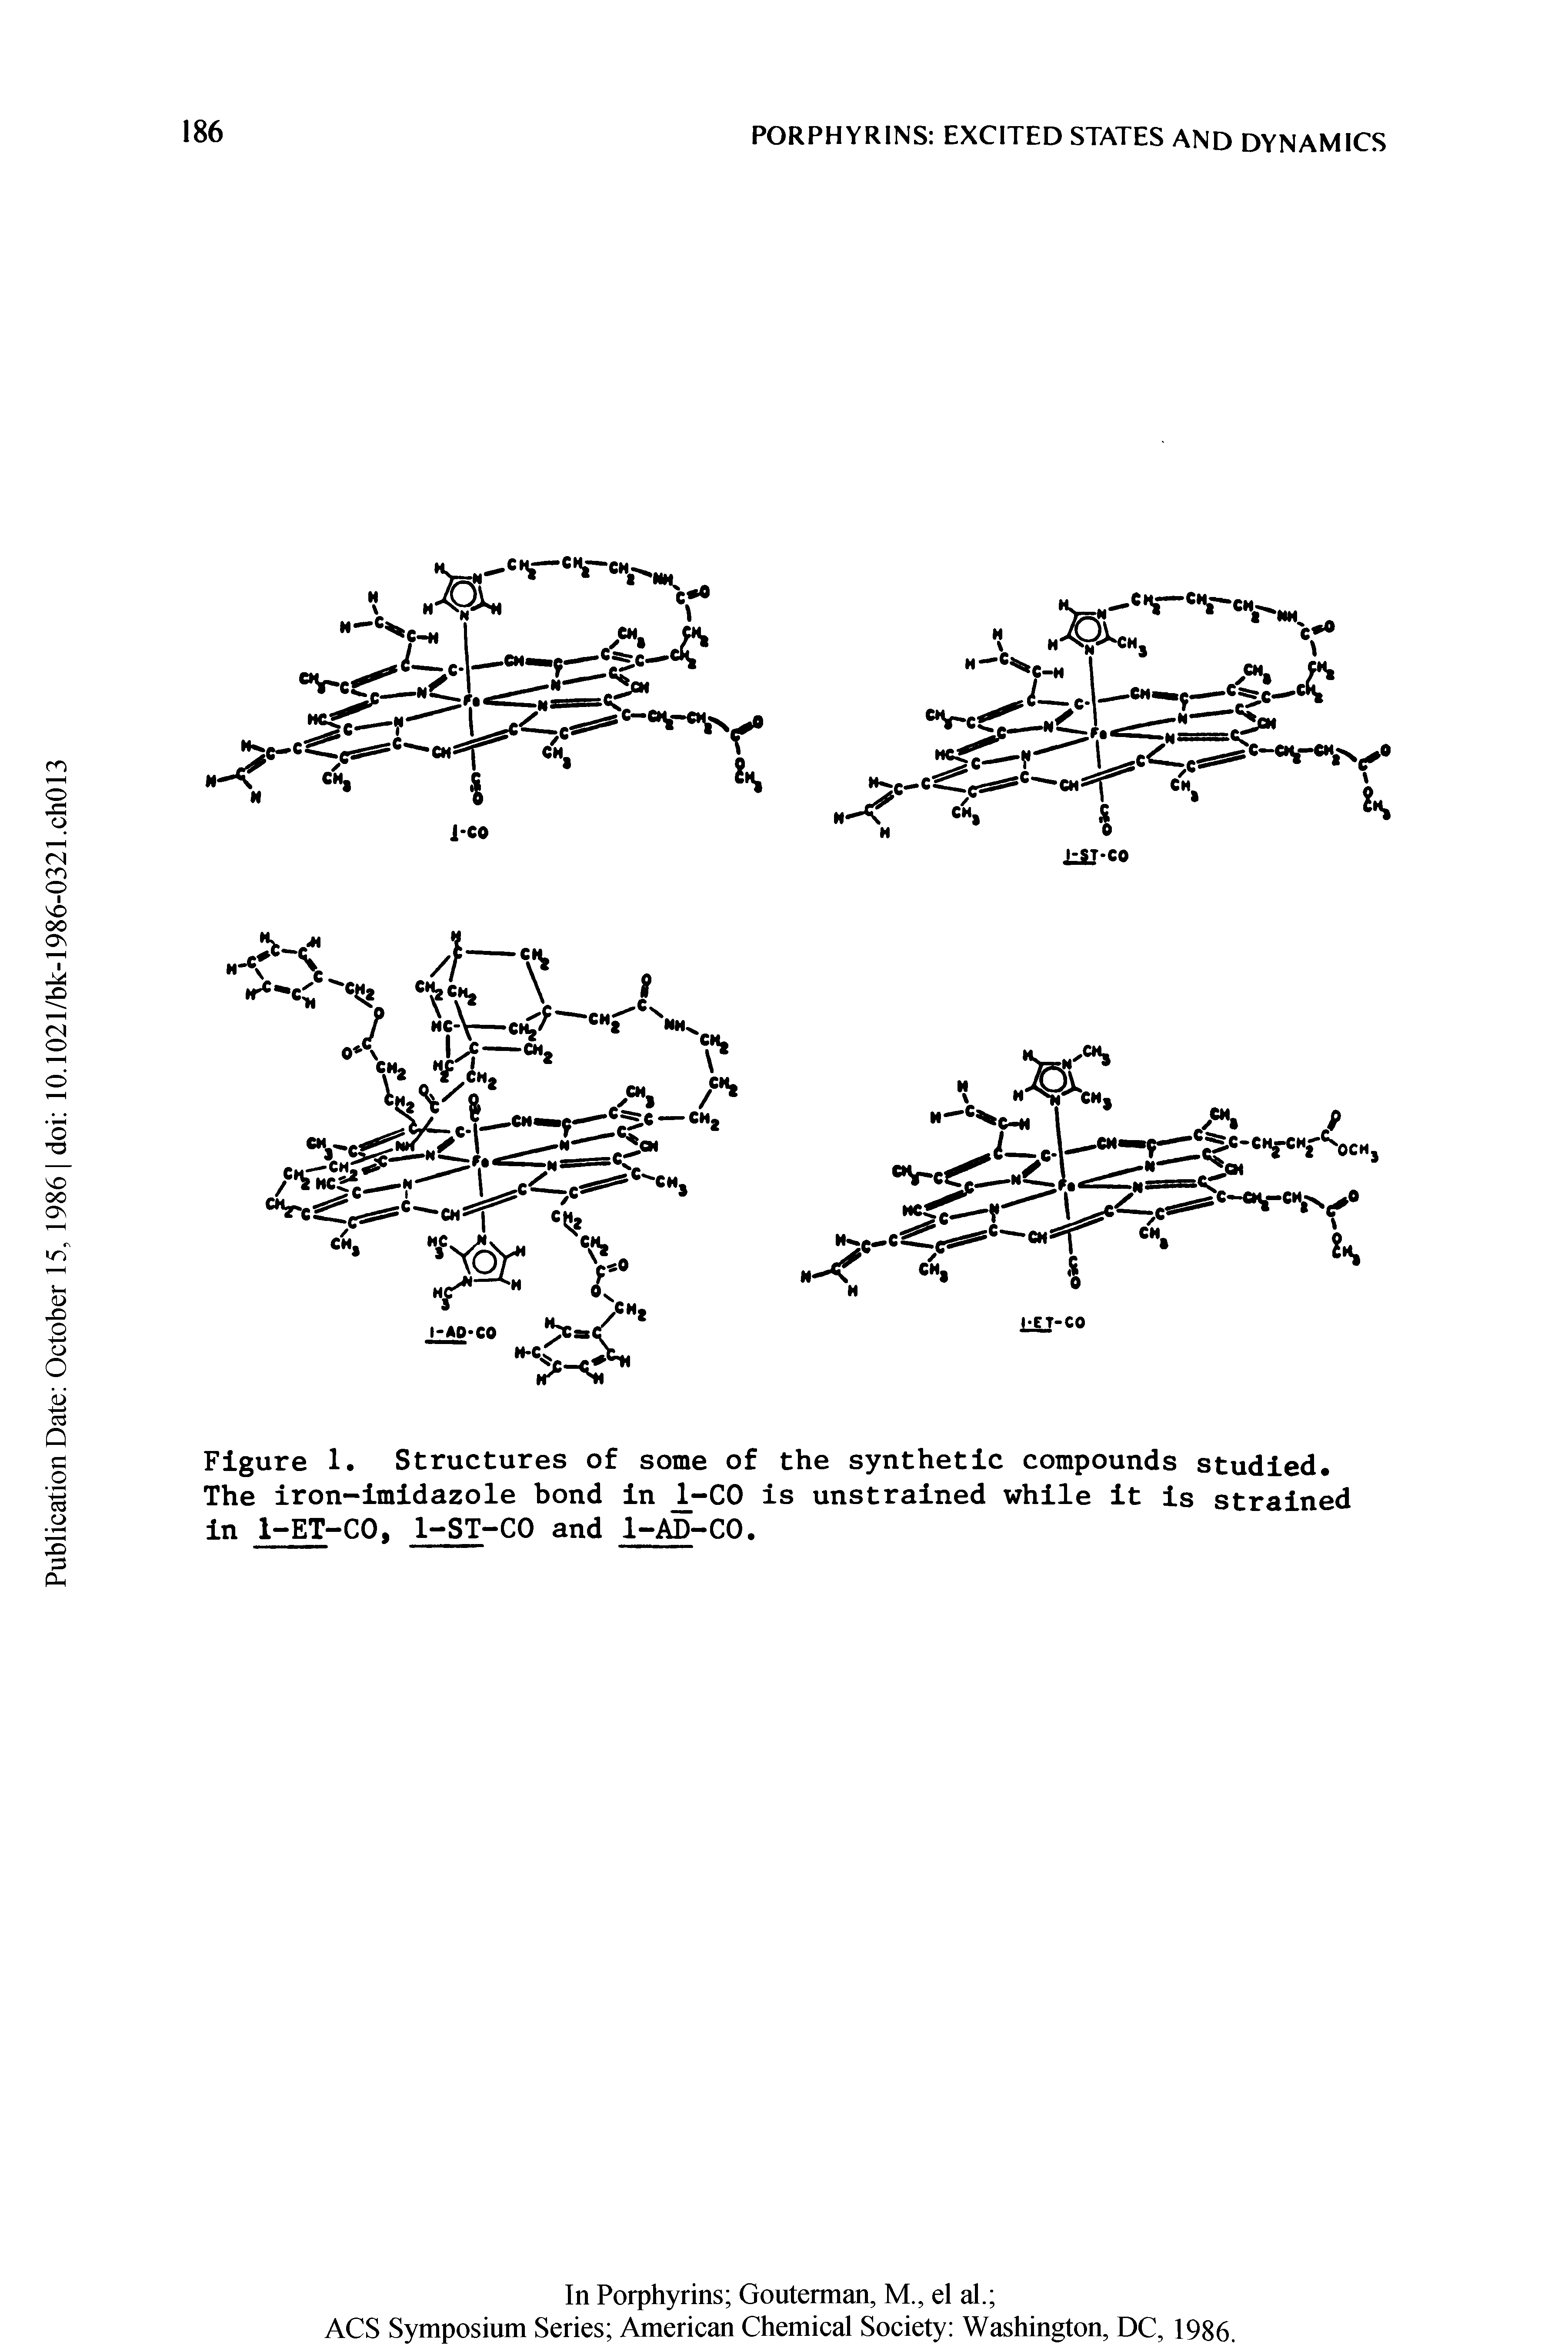 Figure 1. Structures of some of the synthetic compounds studied. The iron-imidazole bond in. CO is unstrained while it is strained i-ET-CO, 1-ST-CO and 1-AD-CO.